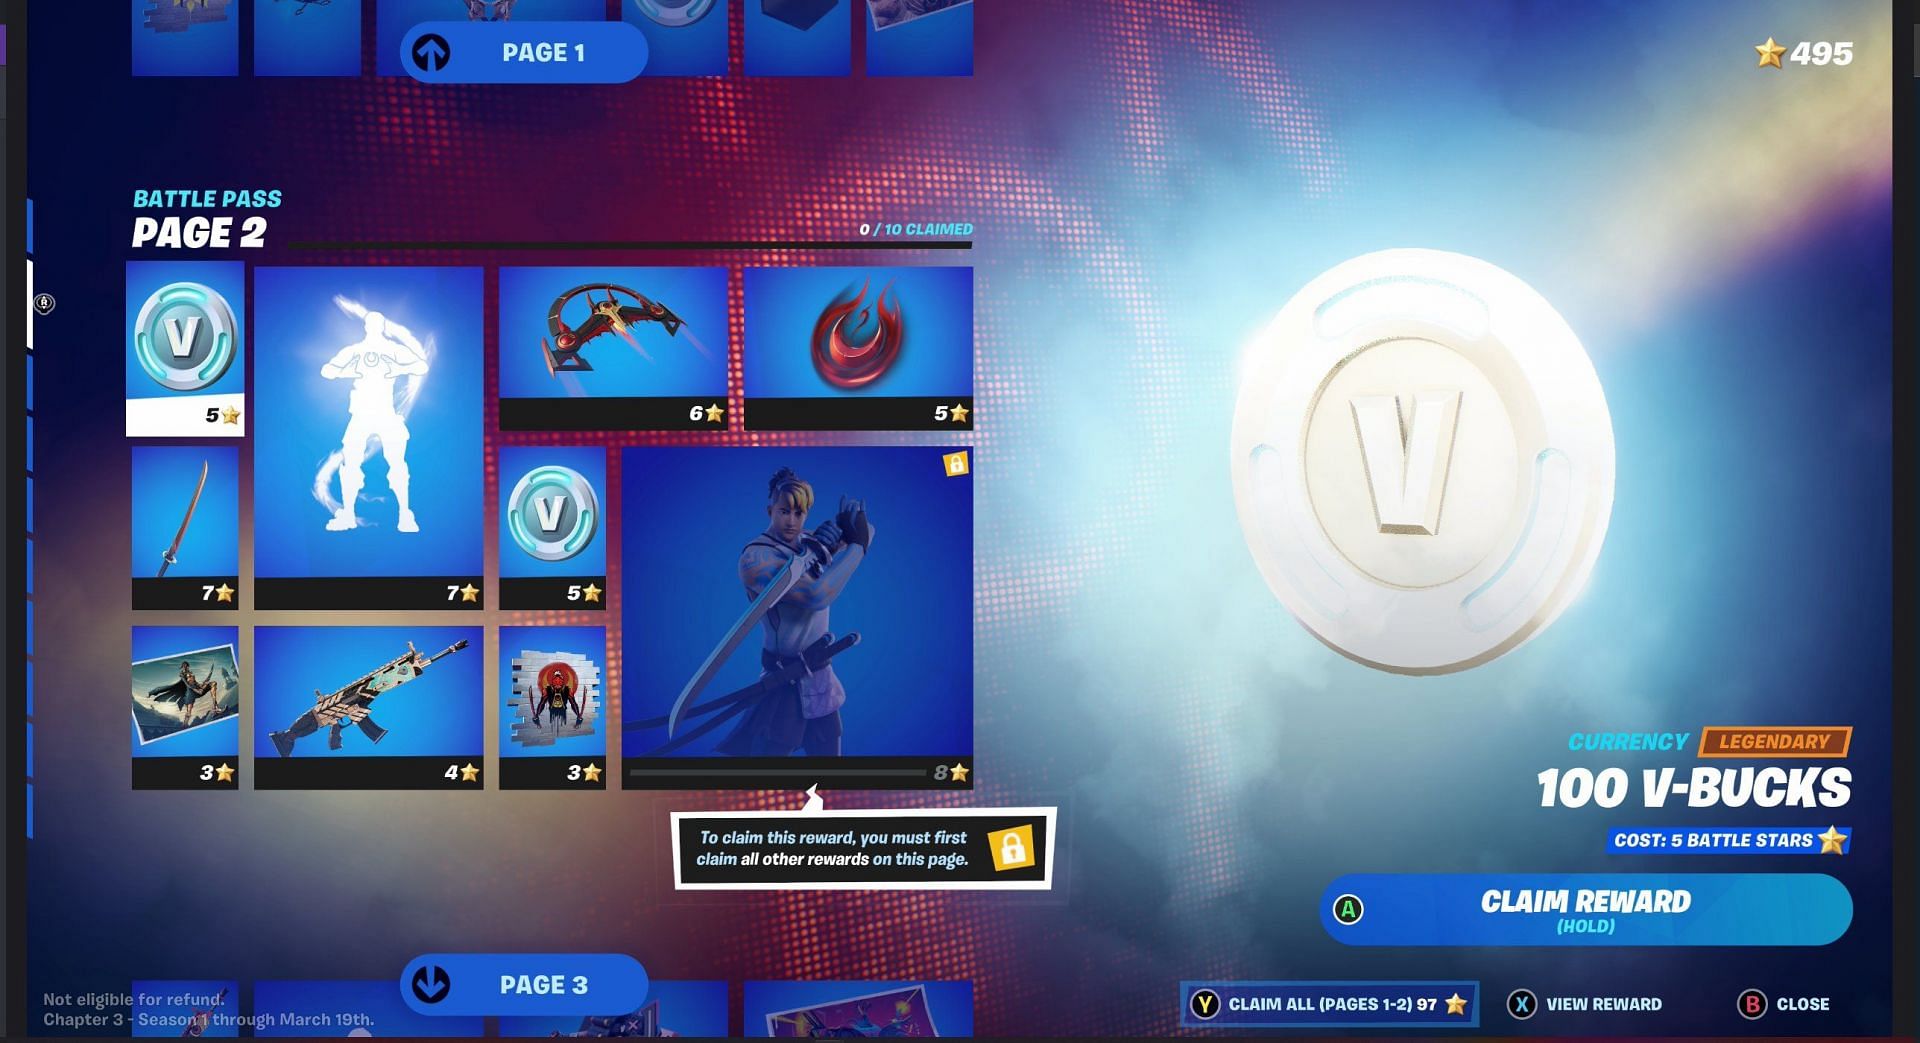 Page 2 of the Battle Pass (Image via Fortnite)